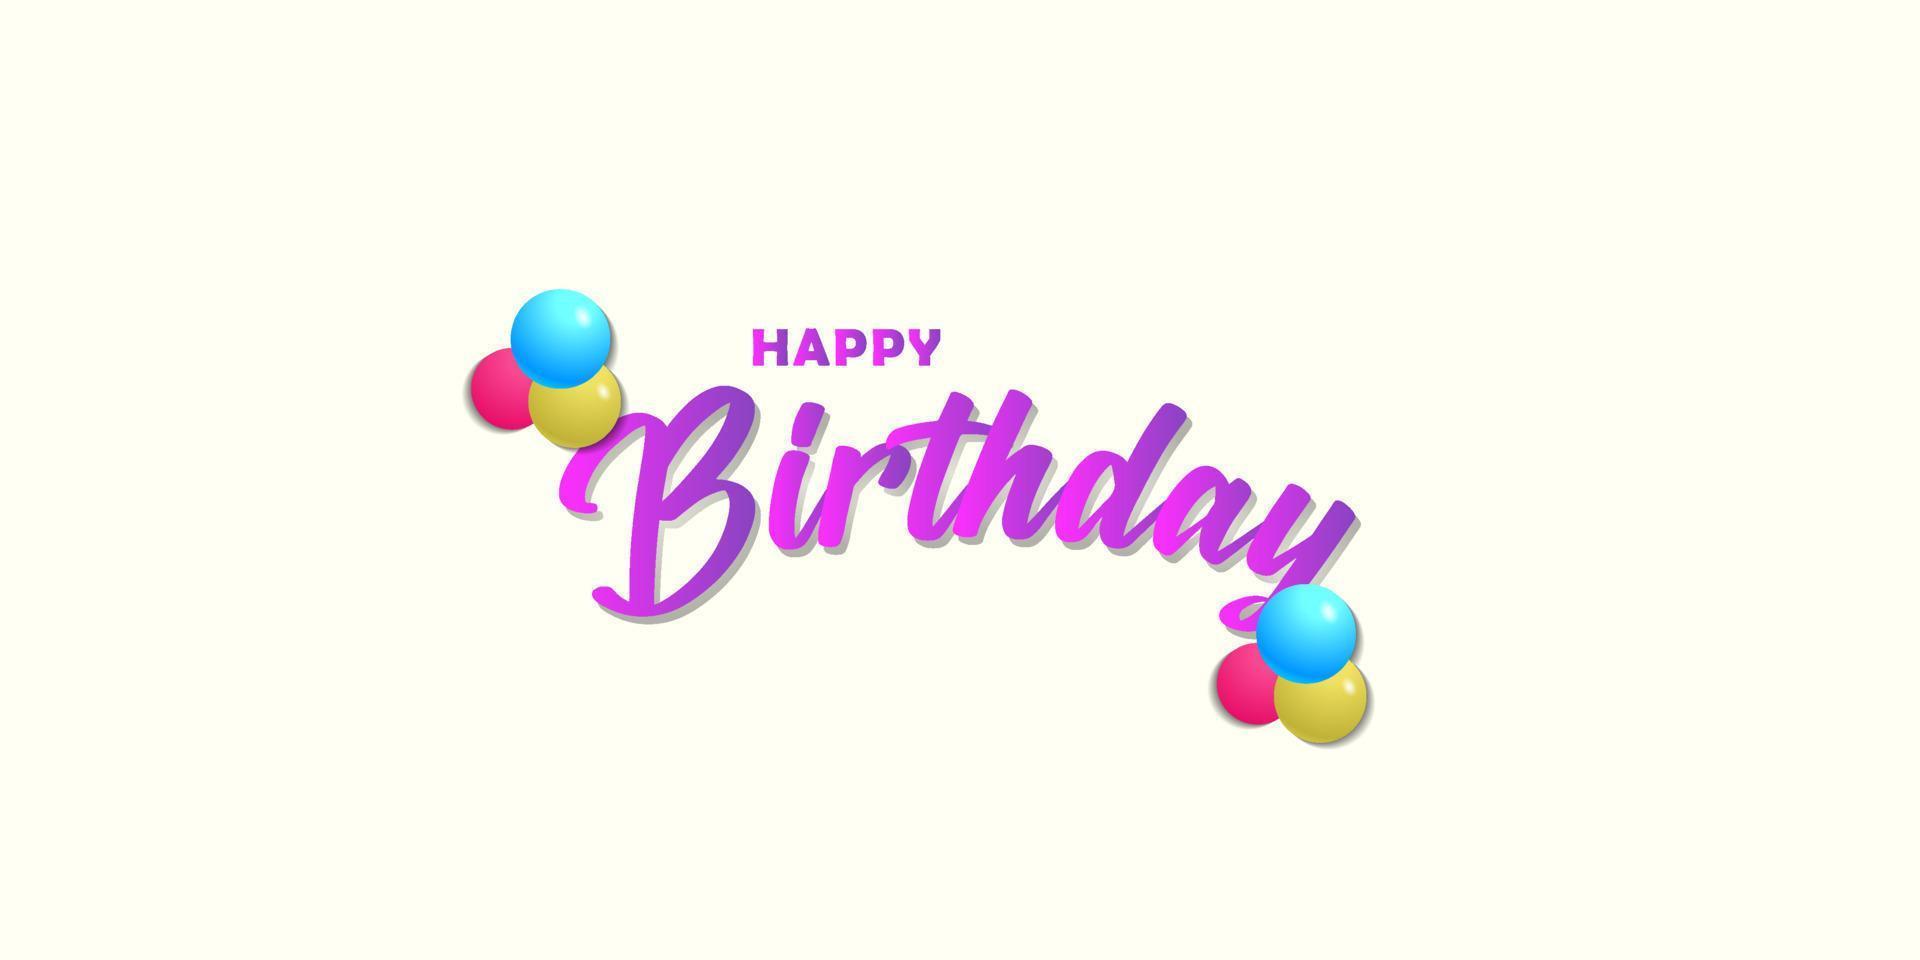 happy birthday writing with colorful balloons vector